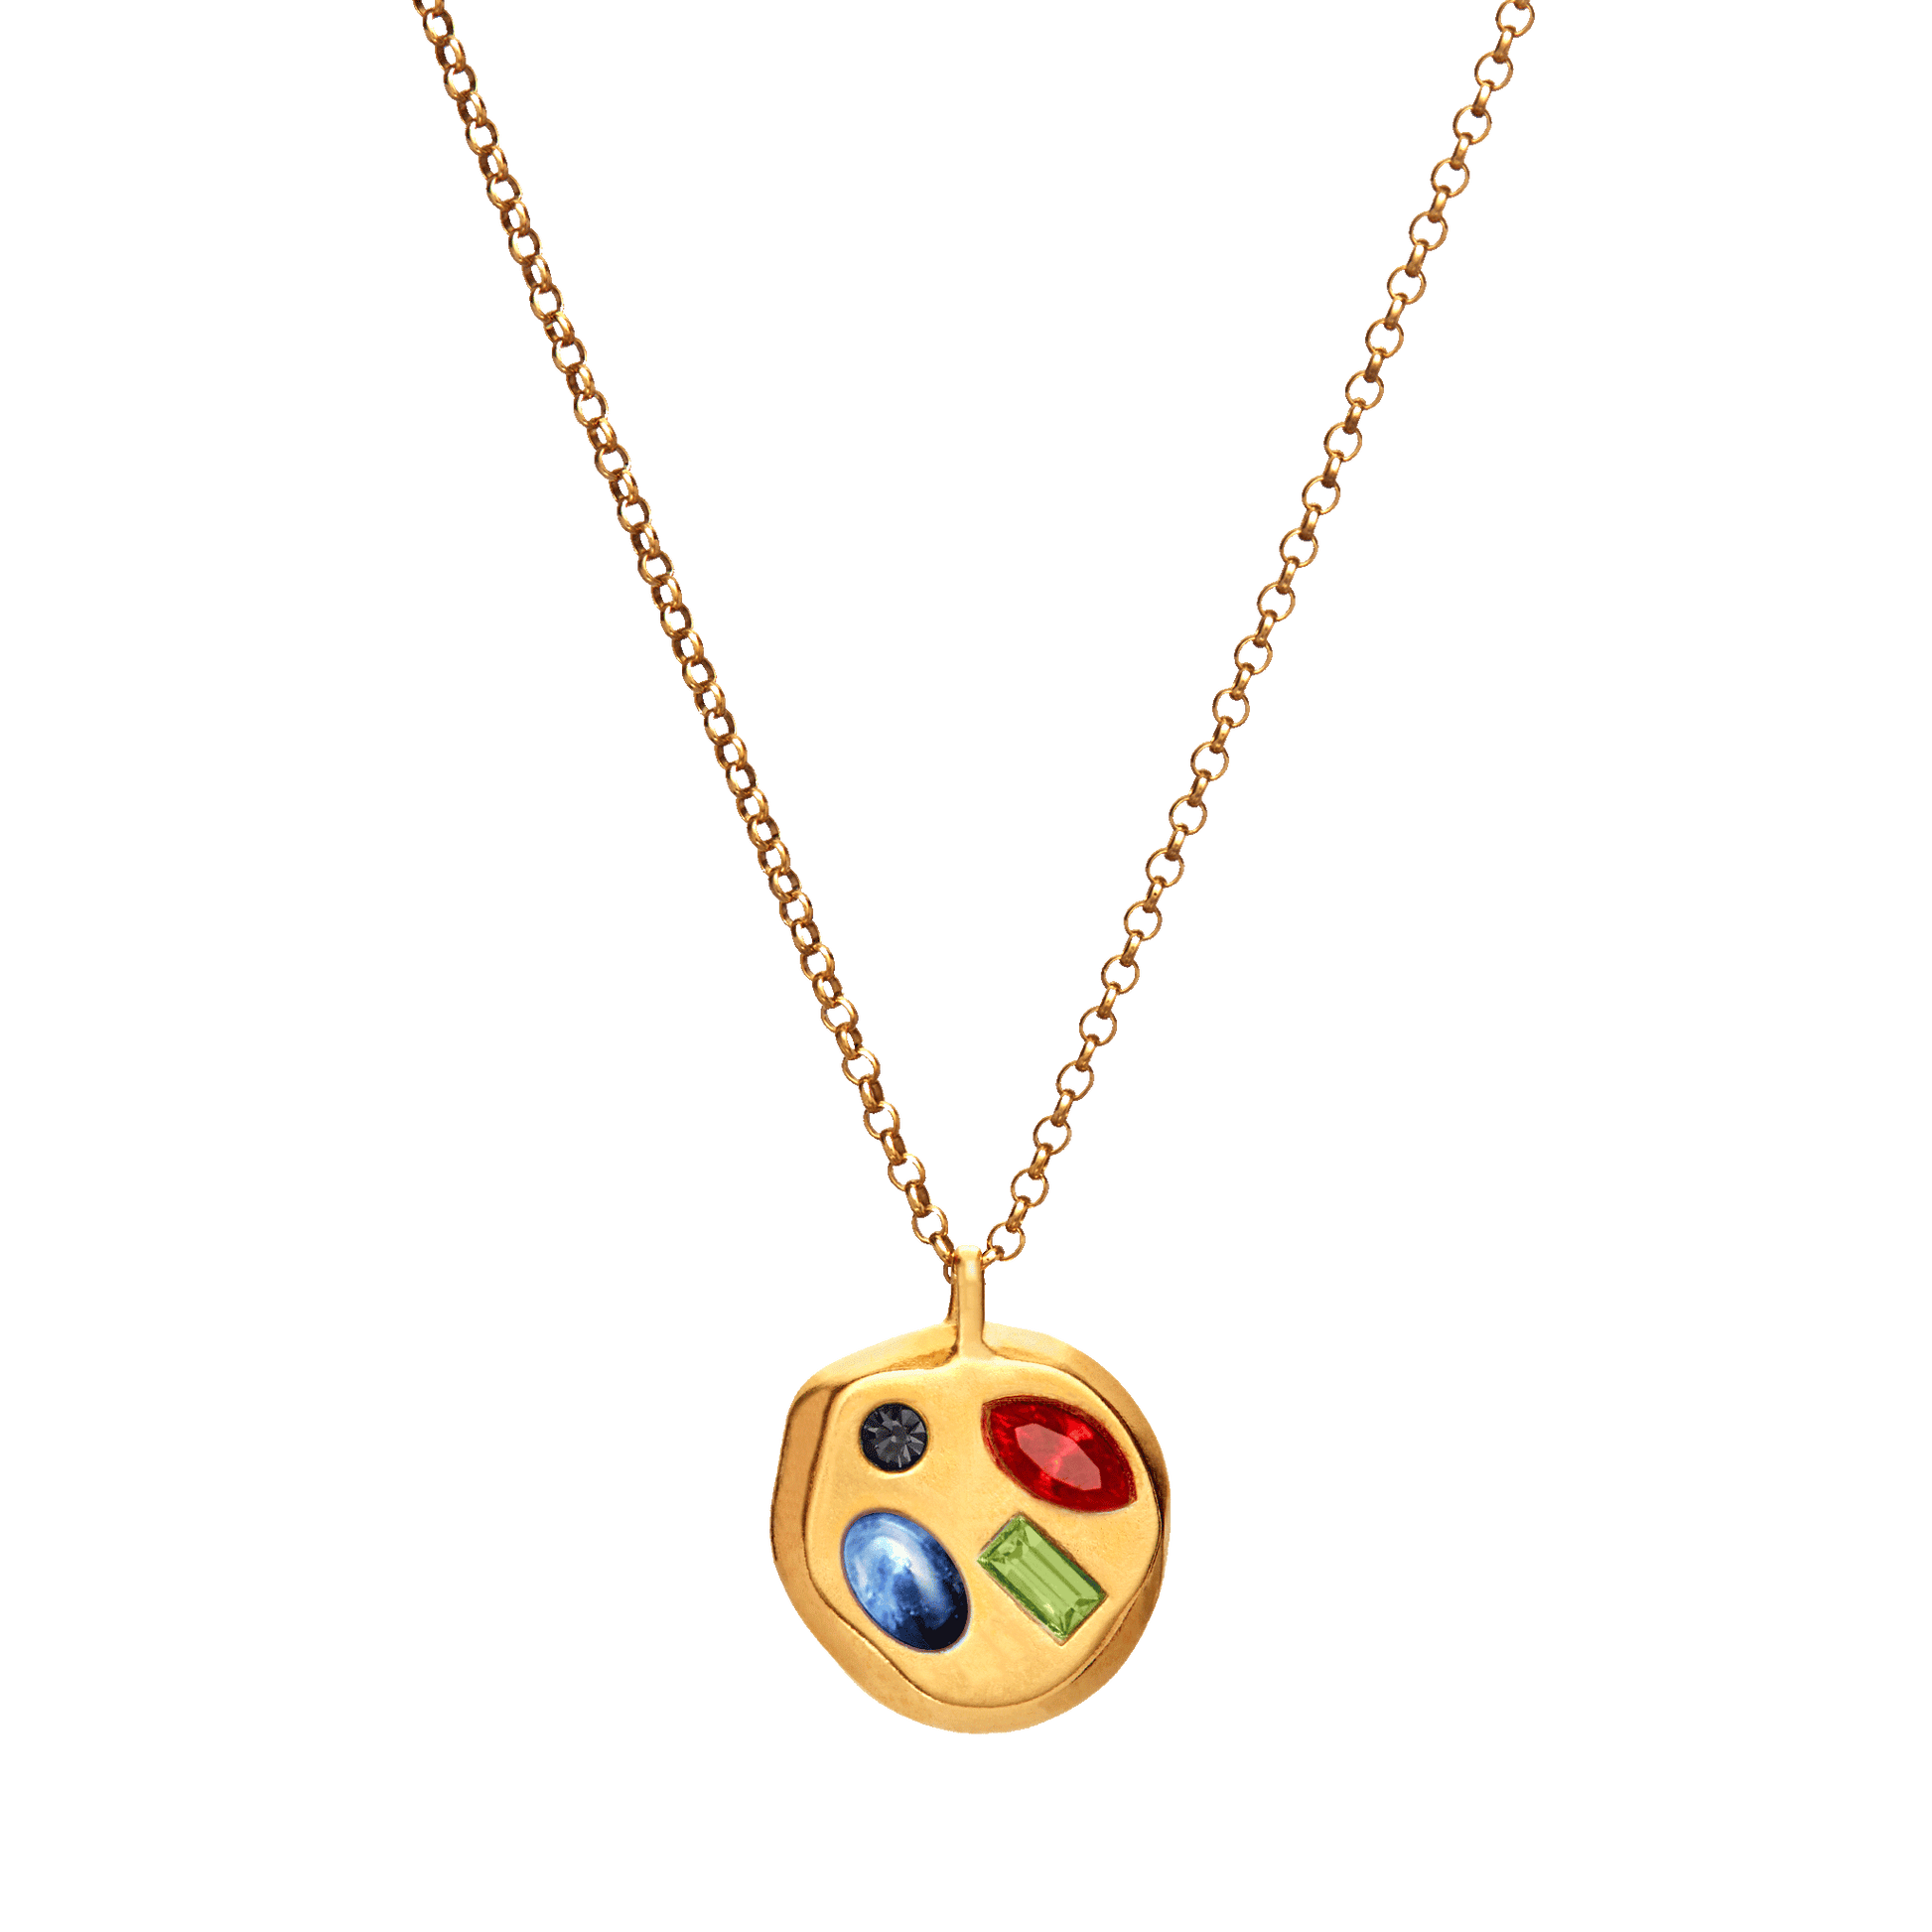 The July Third Pendant